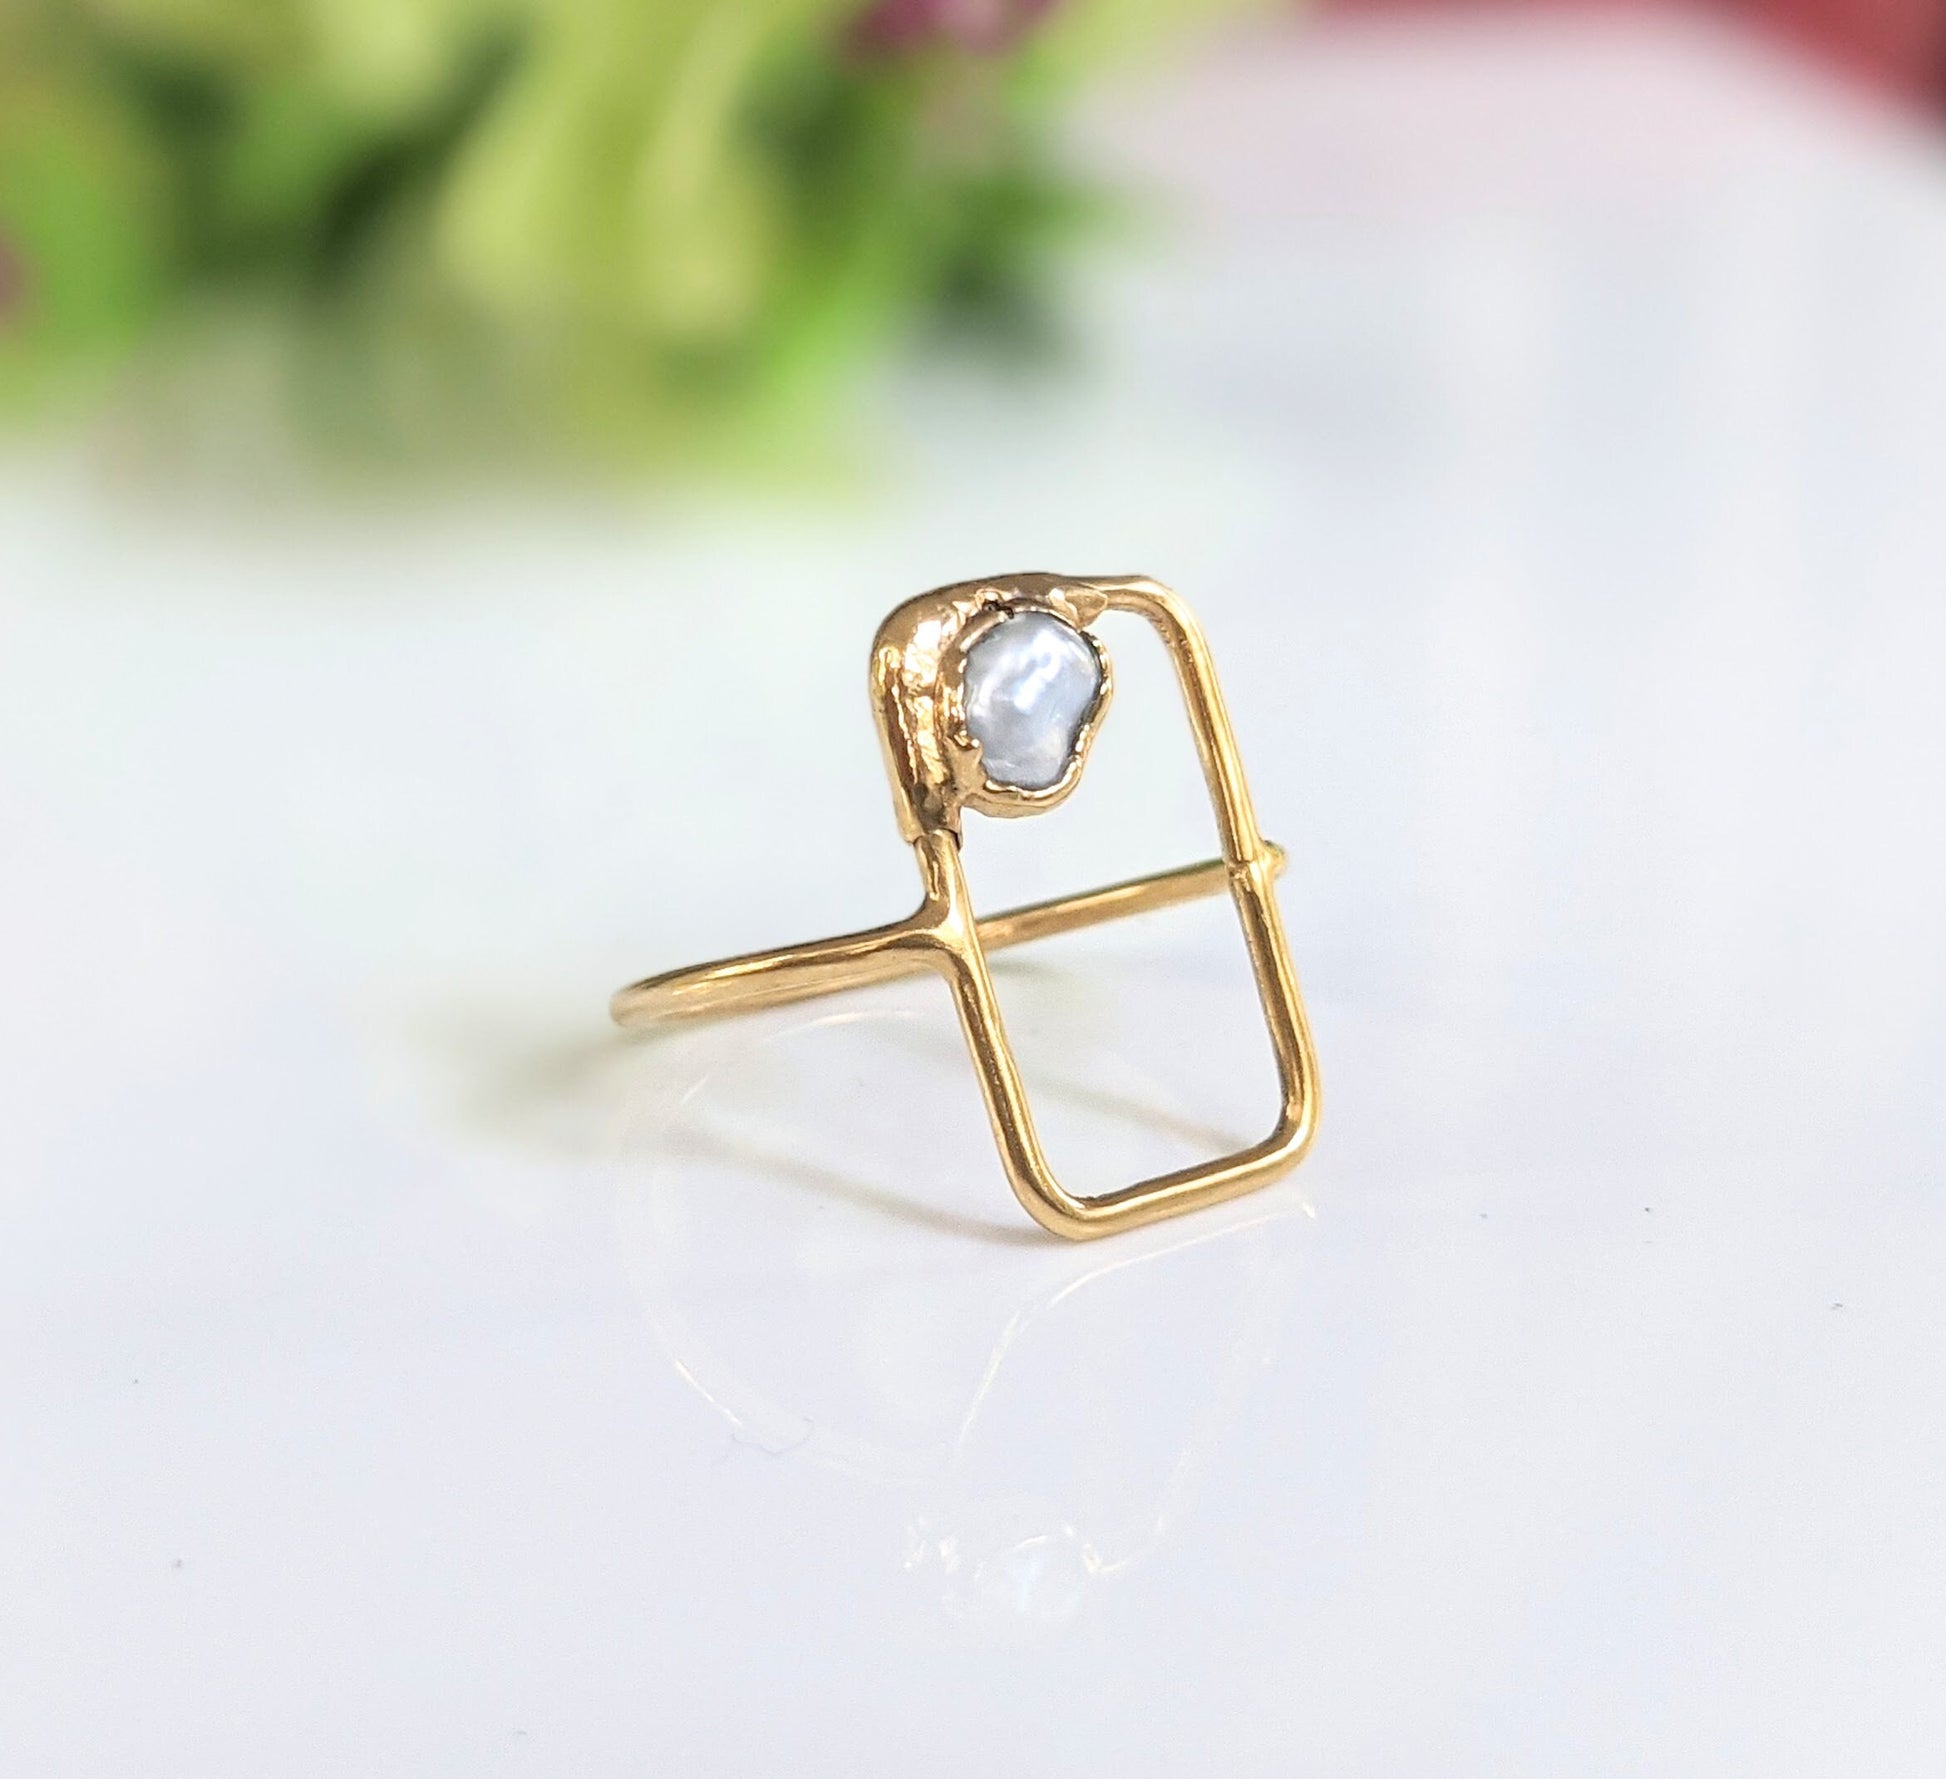 Freshwater pearl ring in unique geometrical 18k Gold setting